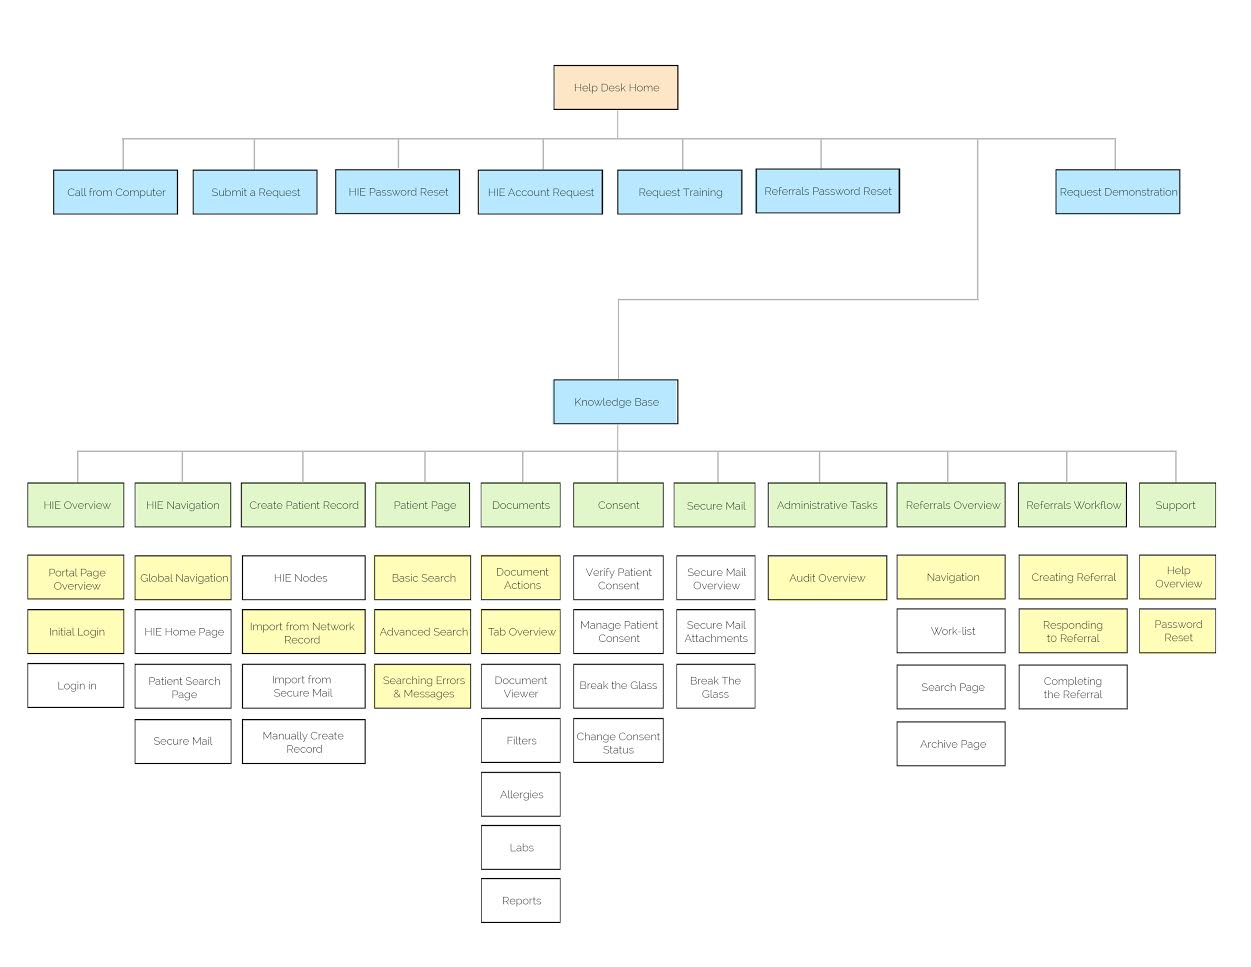 Sorting out sitemap